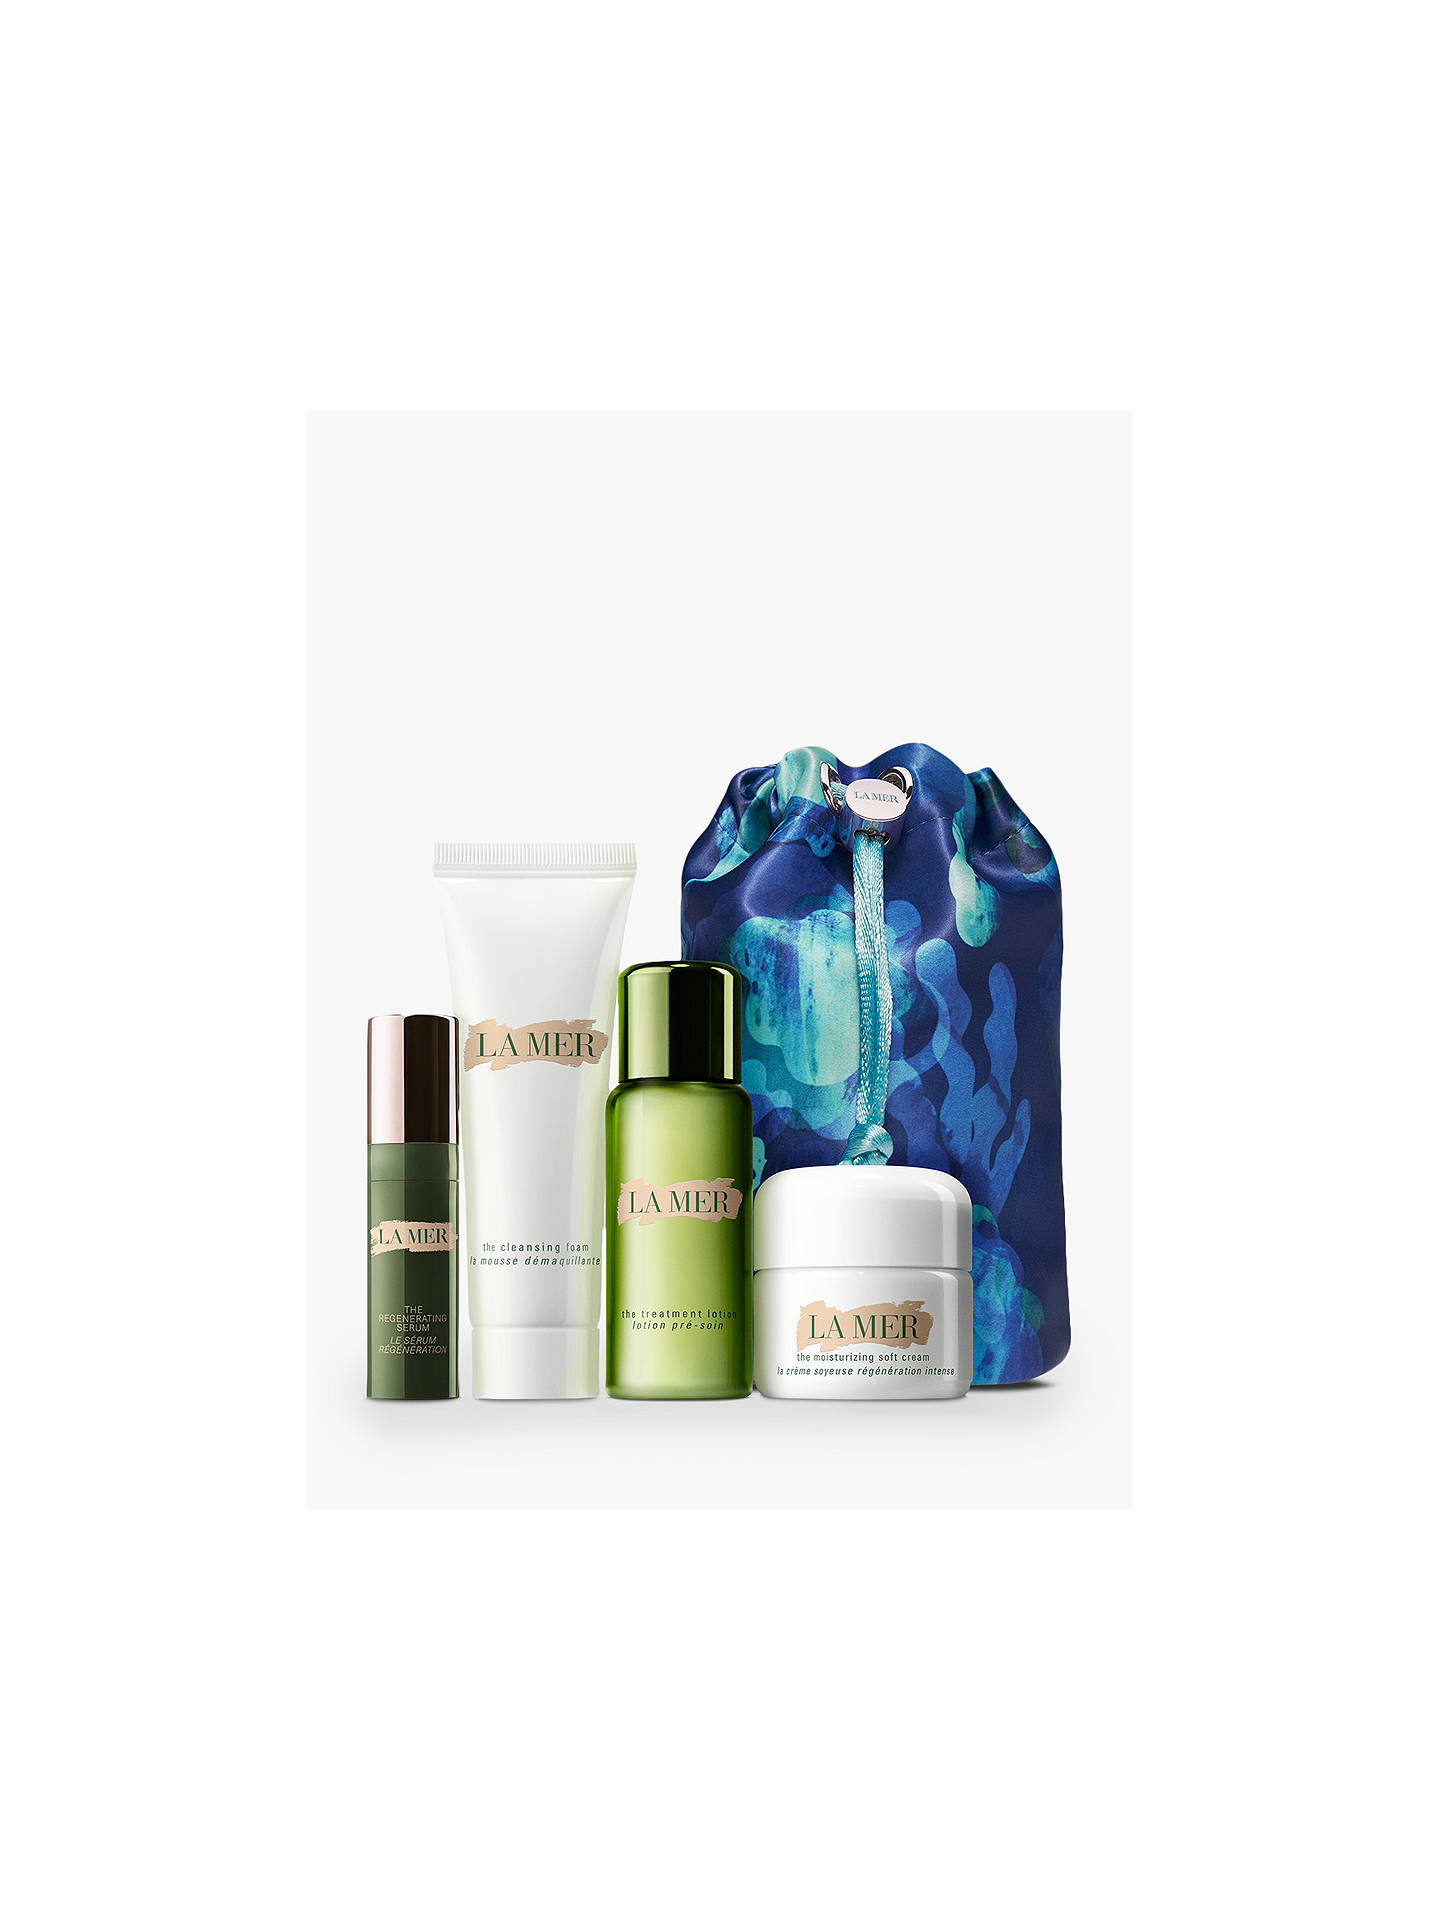 La Mer The Mini Miracle Broth Collection Skincare Gift Set